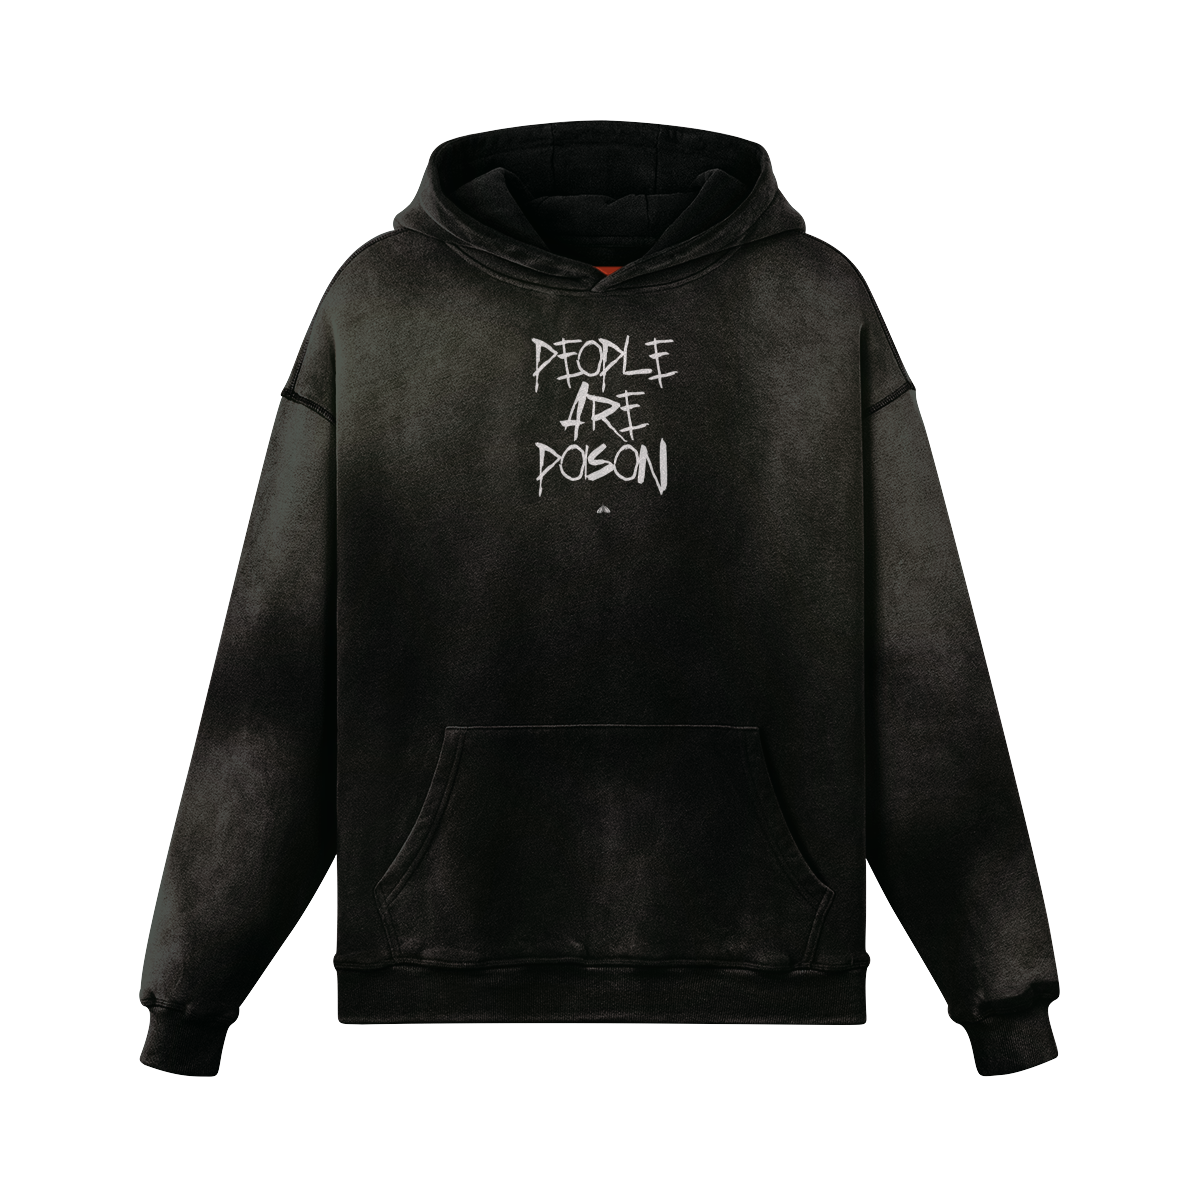 PEOPLE ARE POISON FADED HOODIE